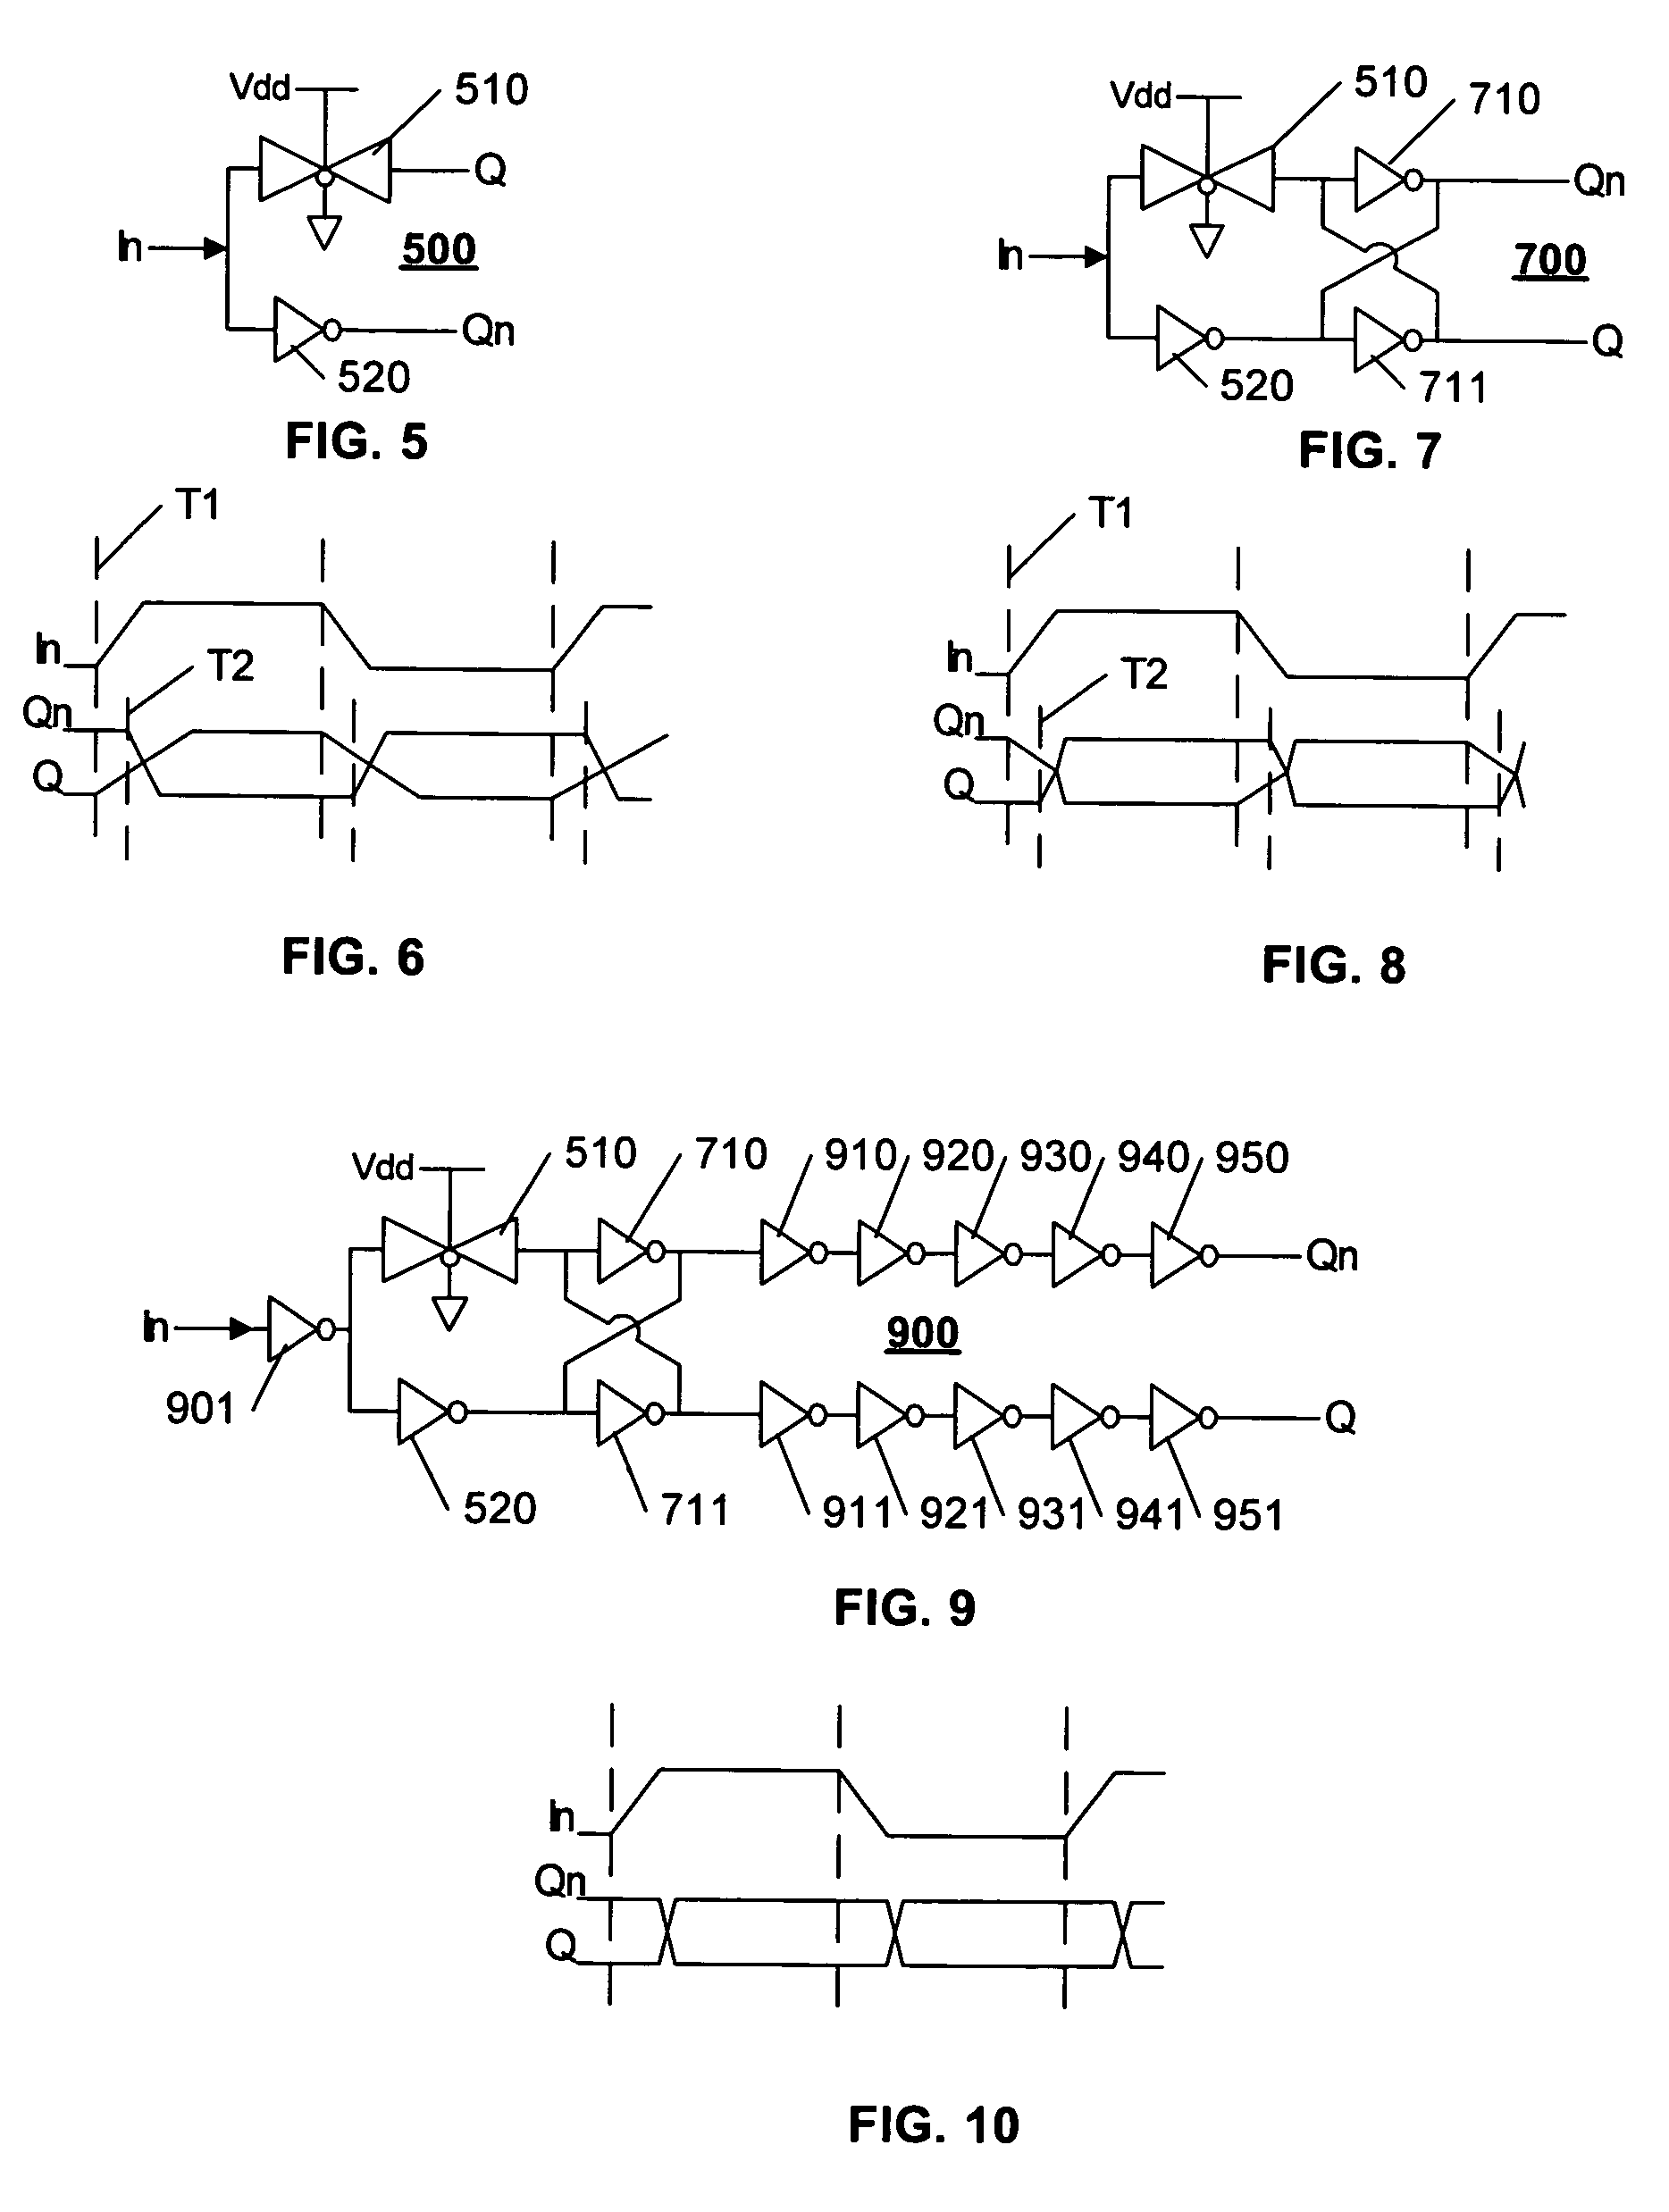 Low-skew single-ended to differential converter